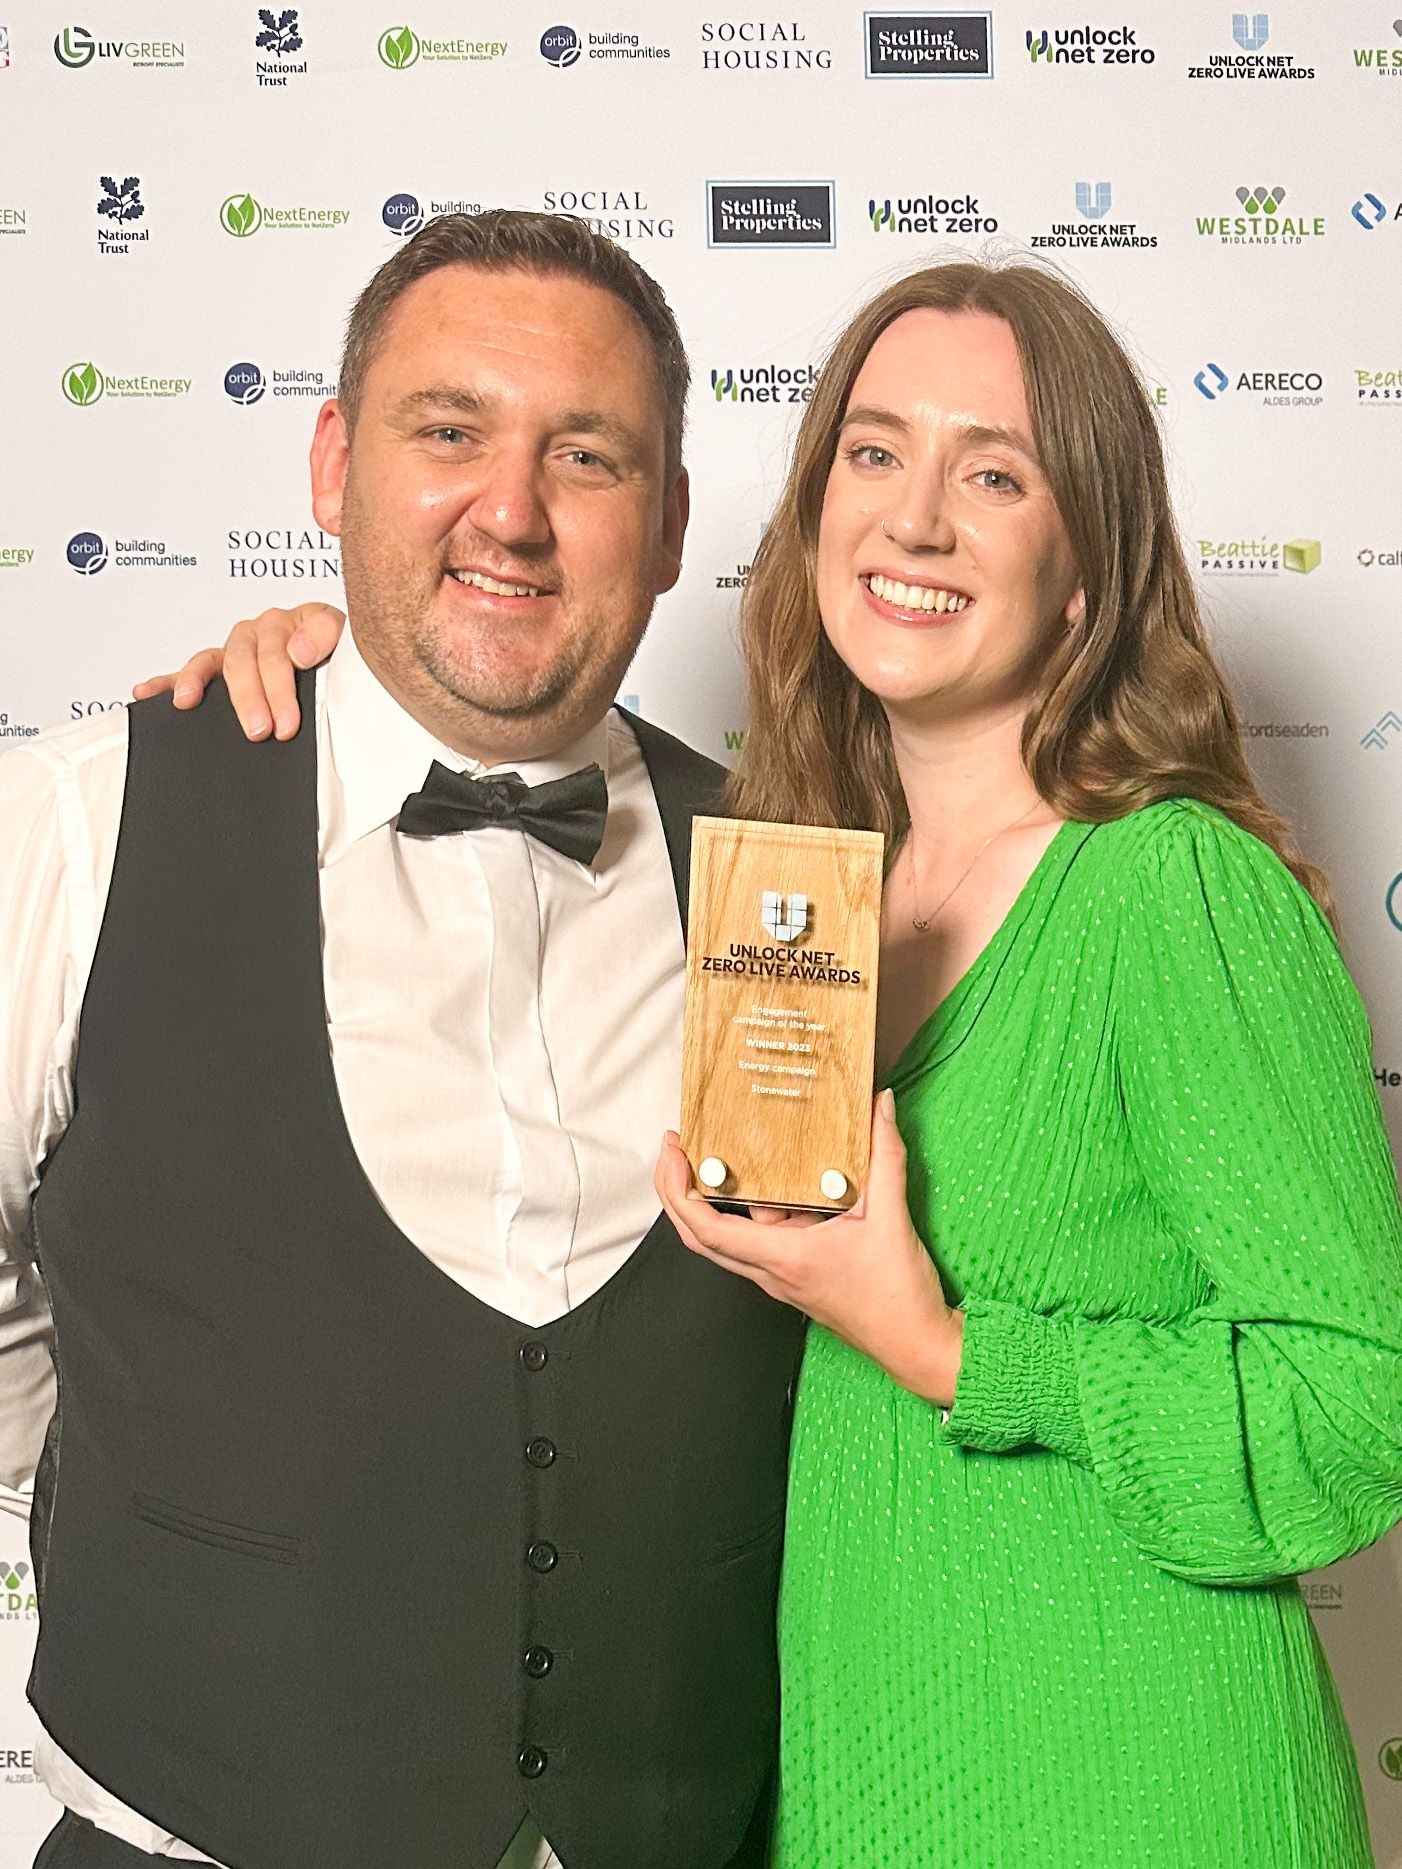 Image of two Stonewater colleagues holding an award